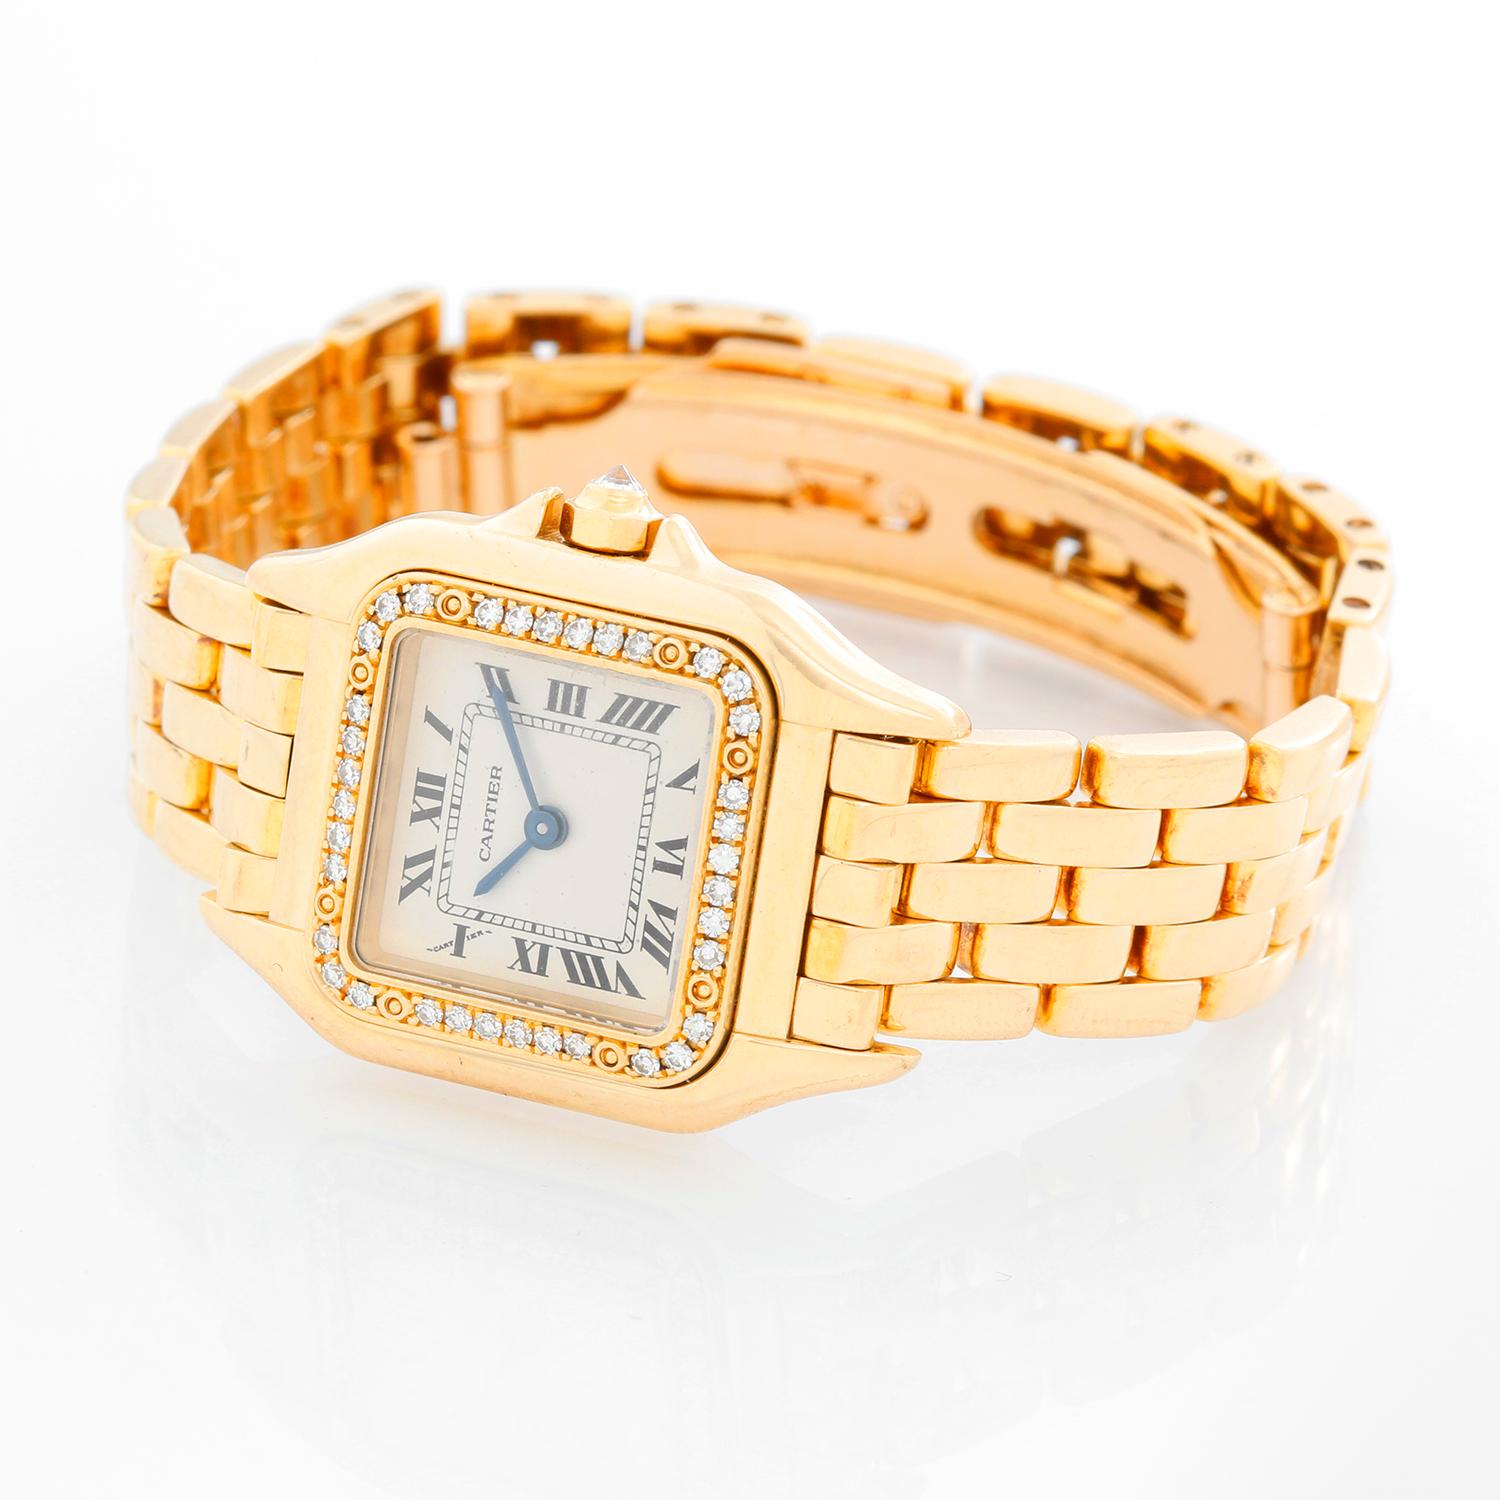 Cartier 18K Yellow Gold Panther Ladies Watch - Quartz. 18K Yellow Gold with diamonds (30 x 22 mm) ; Diamond bezel.. Silver dial with Roman Numerals. 18K Yellow Gold Panther bracelet with deployant buckle. Pre-owned with Cartier  box and books.